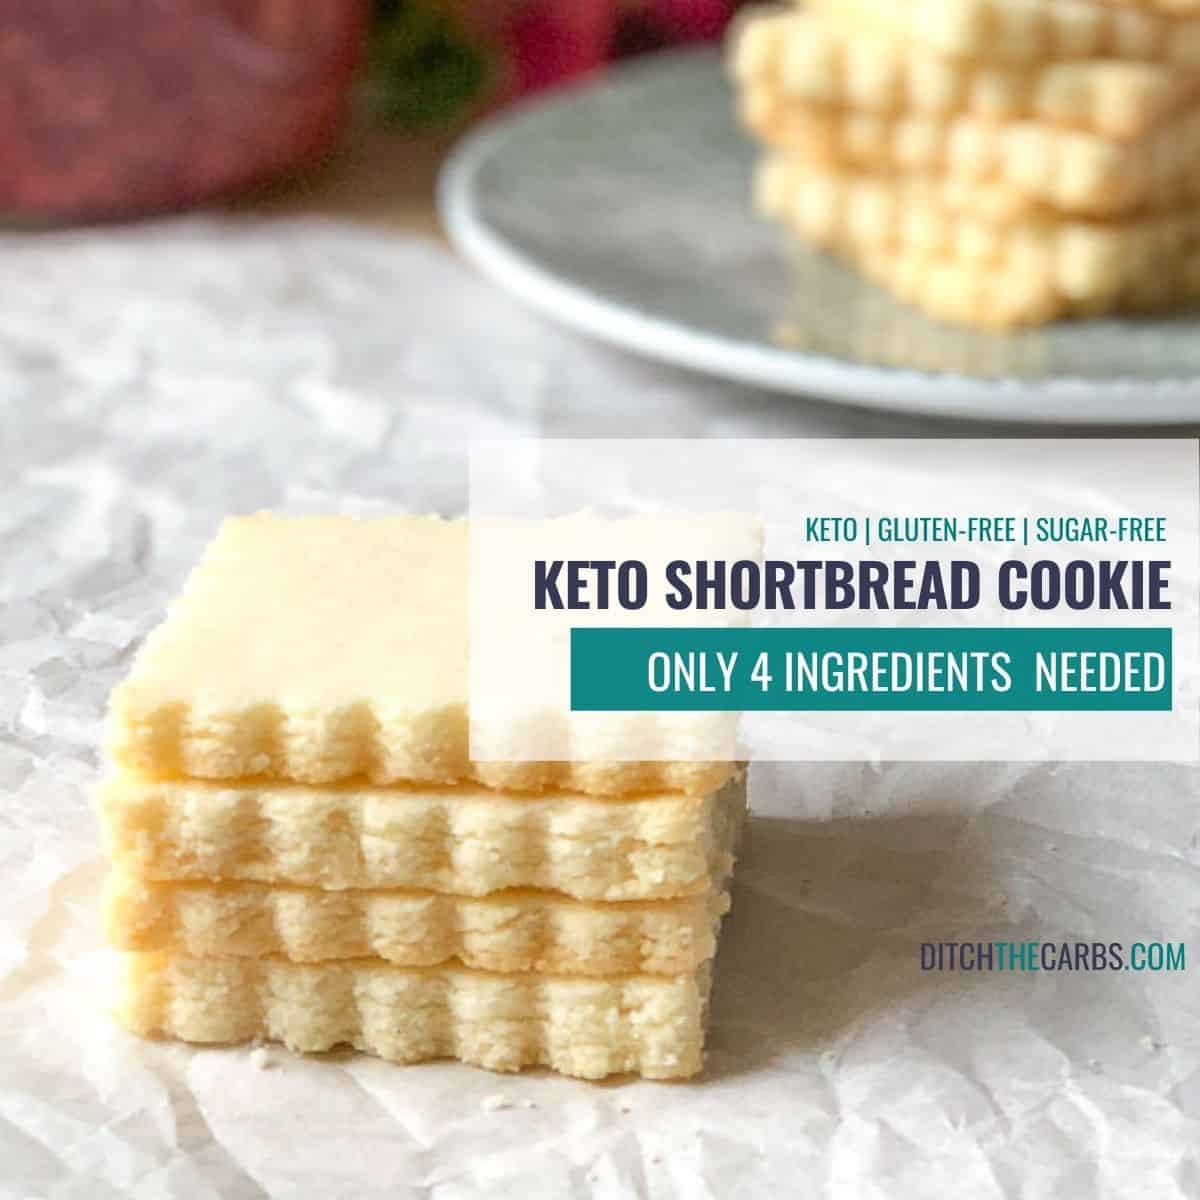 Yum! Buttery and Flakey Shortbread Cookies!